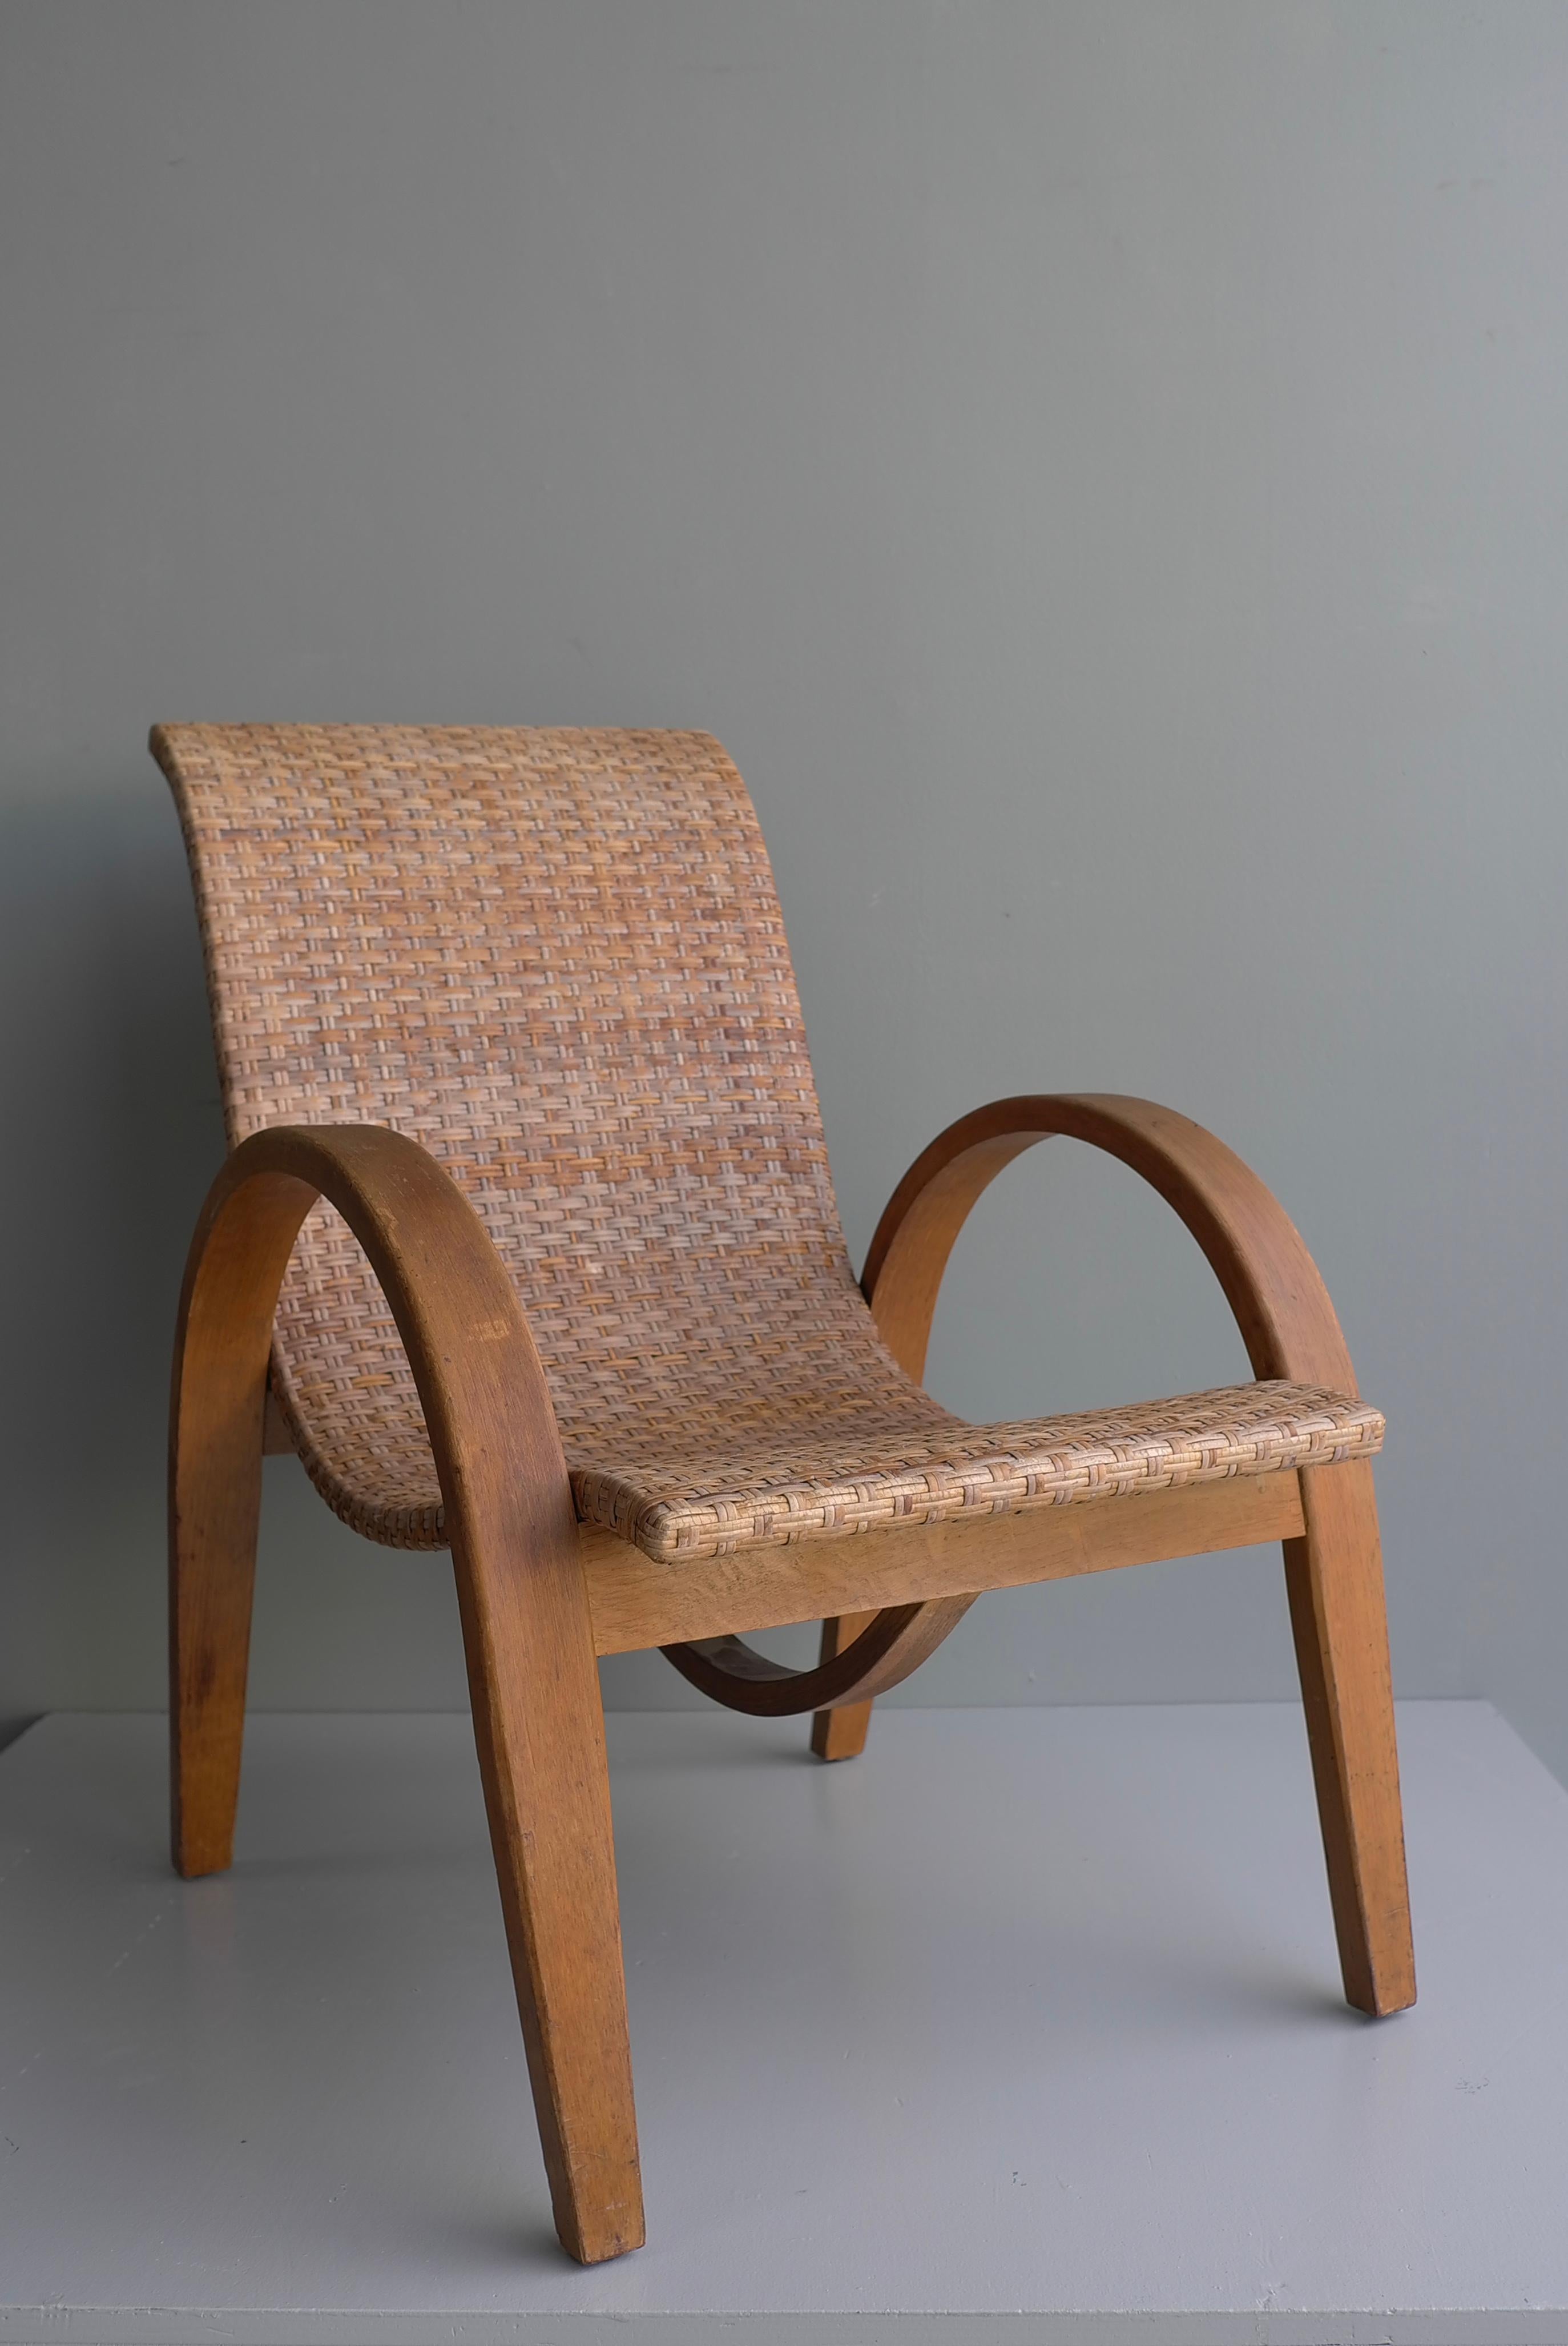 Sculptural Mid-Century Modern Armchair in Wood and Cane, 1950's In Good Condition For Sale In Den Haag, NL